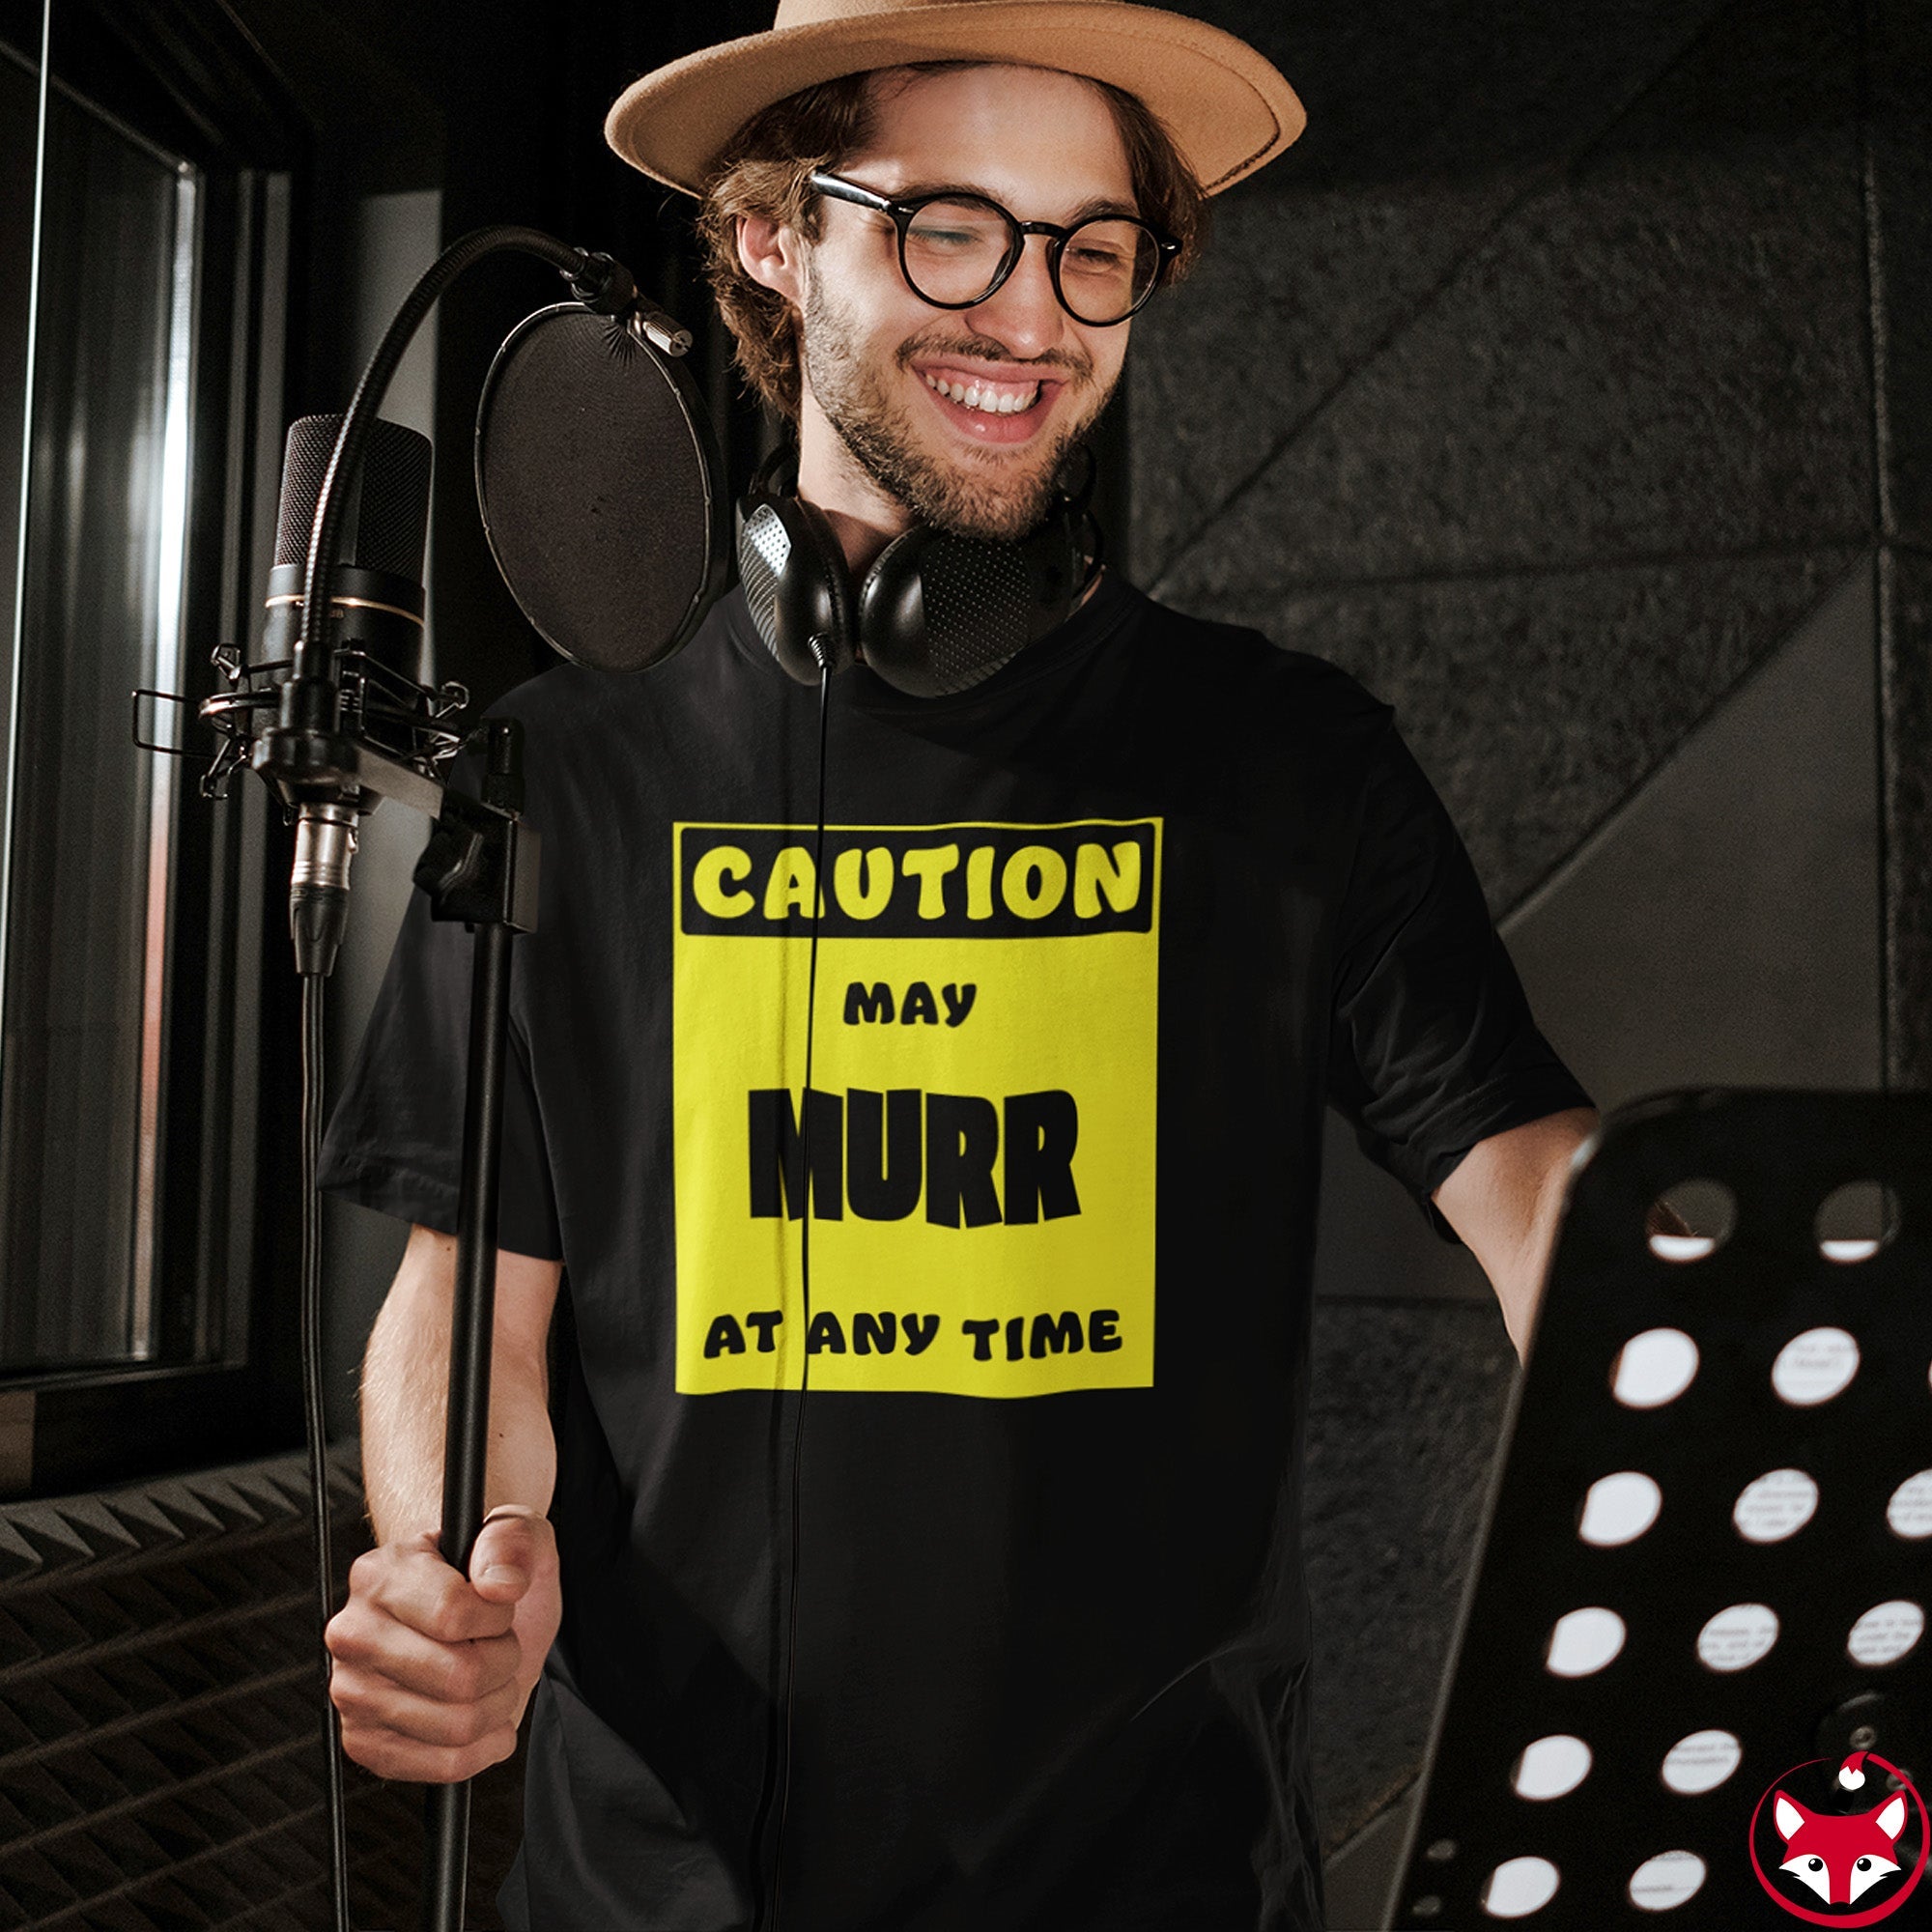 CAUTION! May MURR at any time! - T-Shirt T-Shirt AFLT-Whootorca 